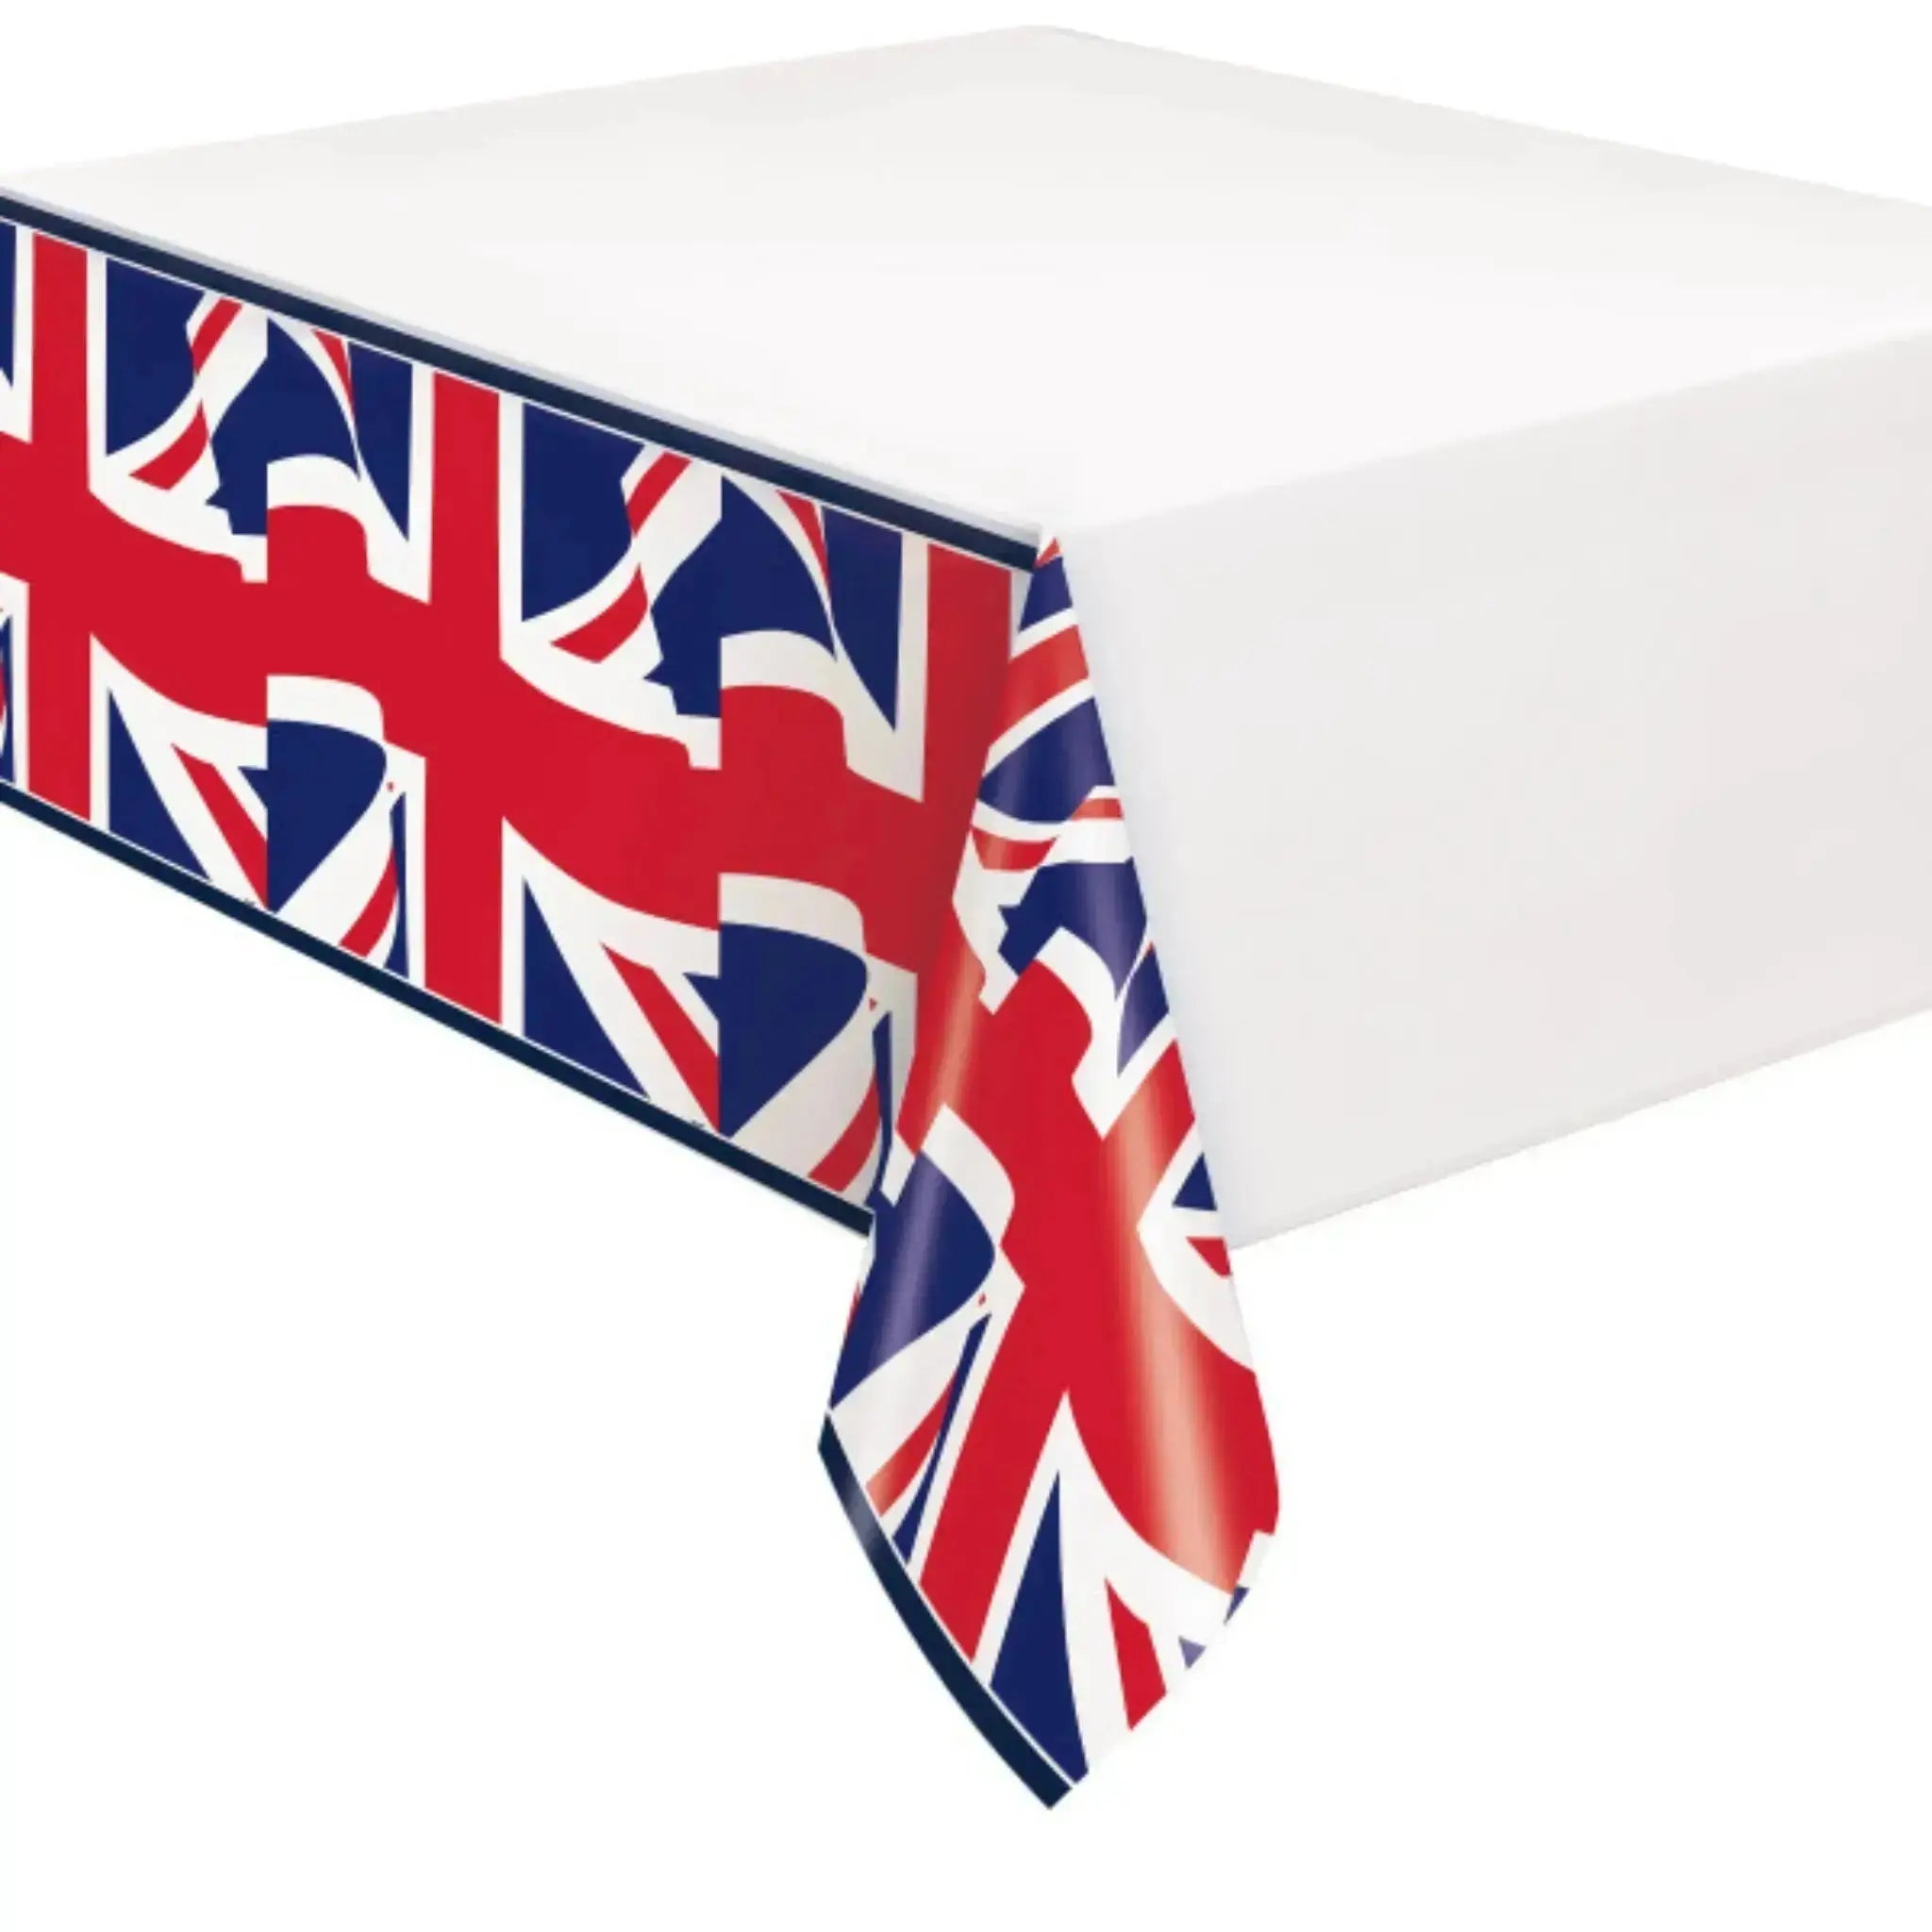 Union Jack Flag Rectangular Plastic Table Cover | The Party Hut